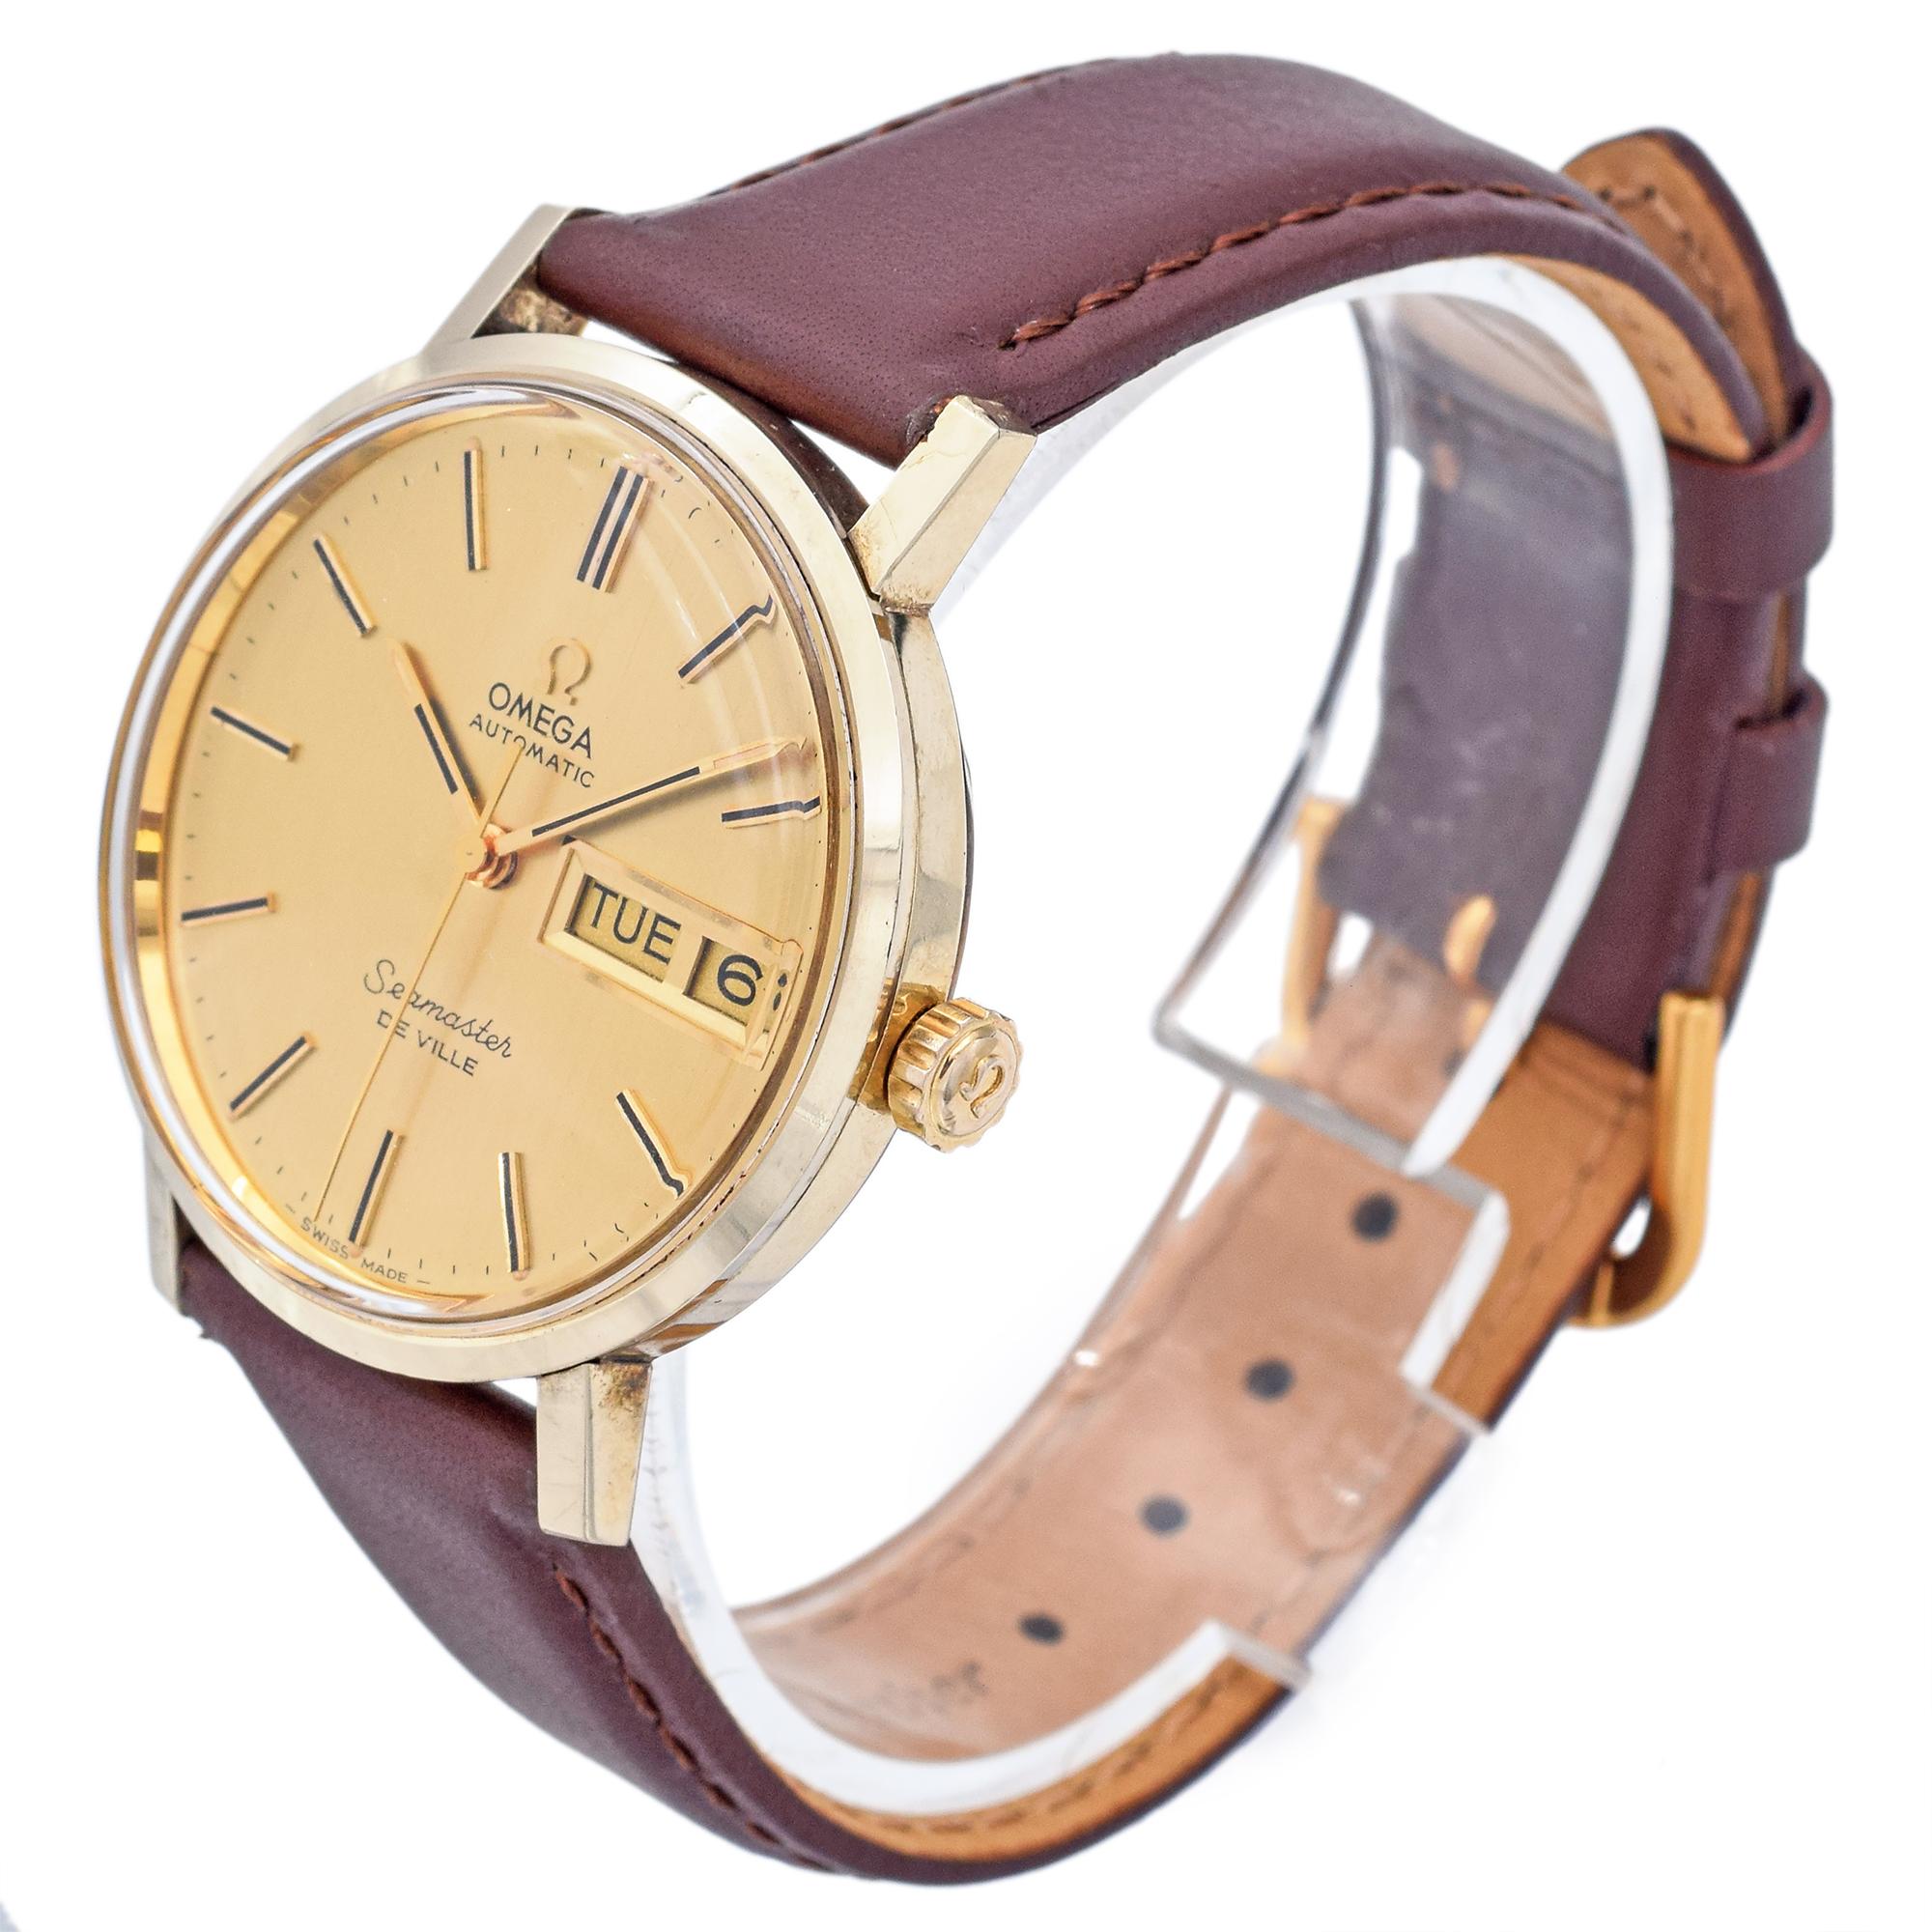 Good condition, keeping accurate time

Case Size: 35 mm
Band Length: 9 Inches
Hallmark: Omega

ITEM #:BR-1070-101123-15